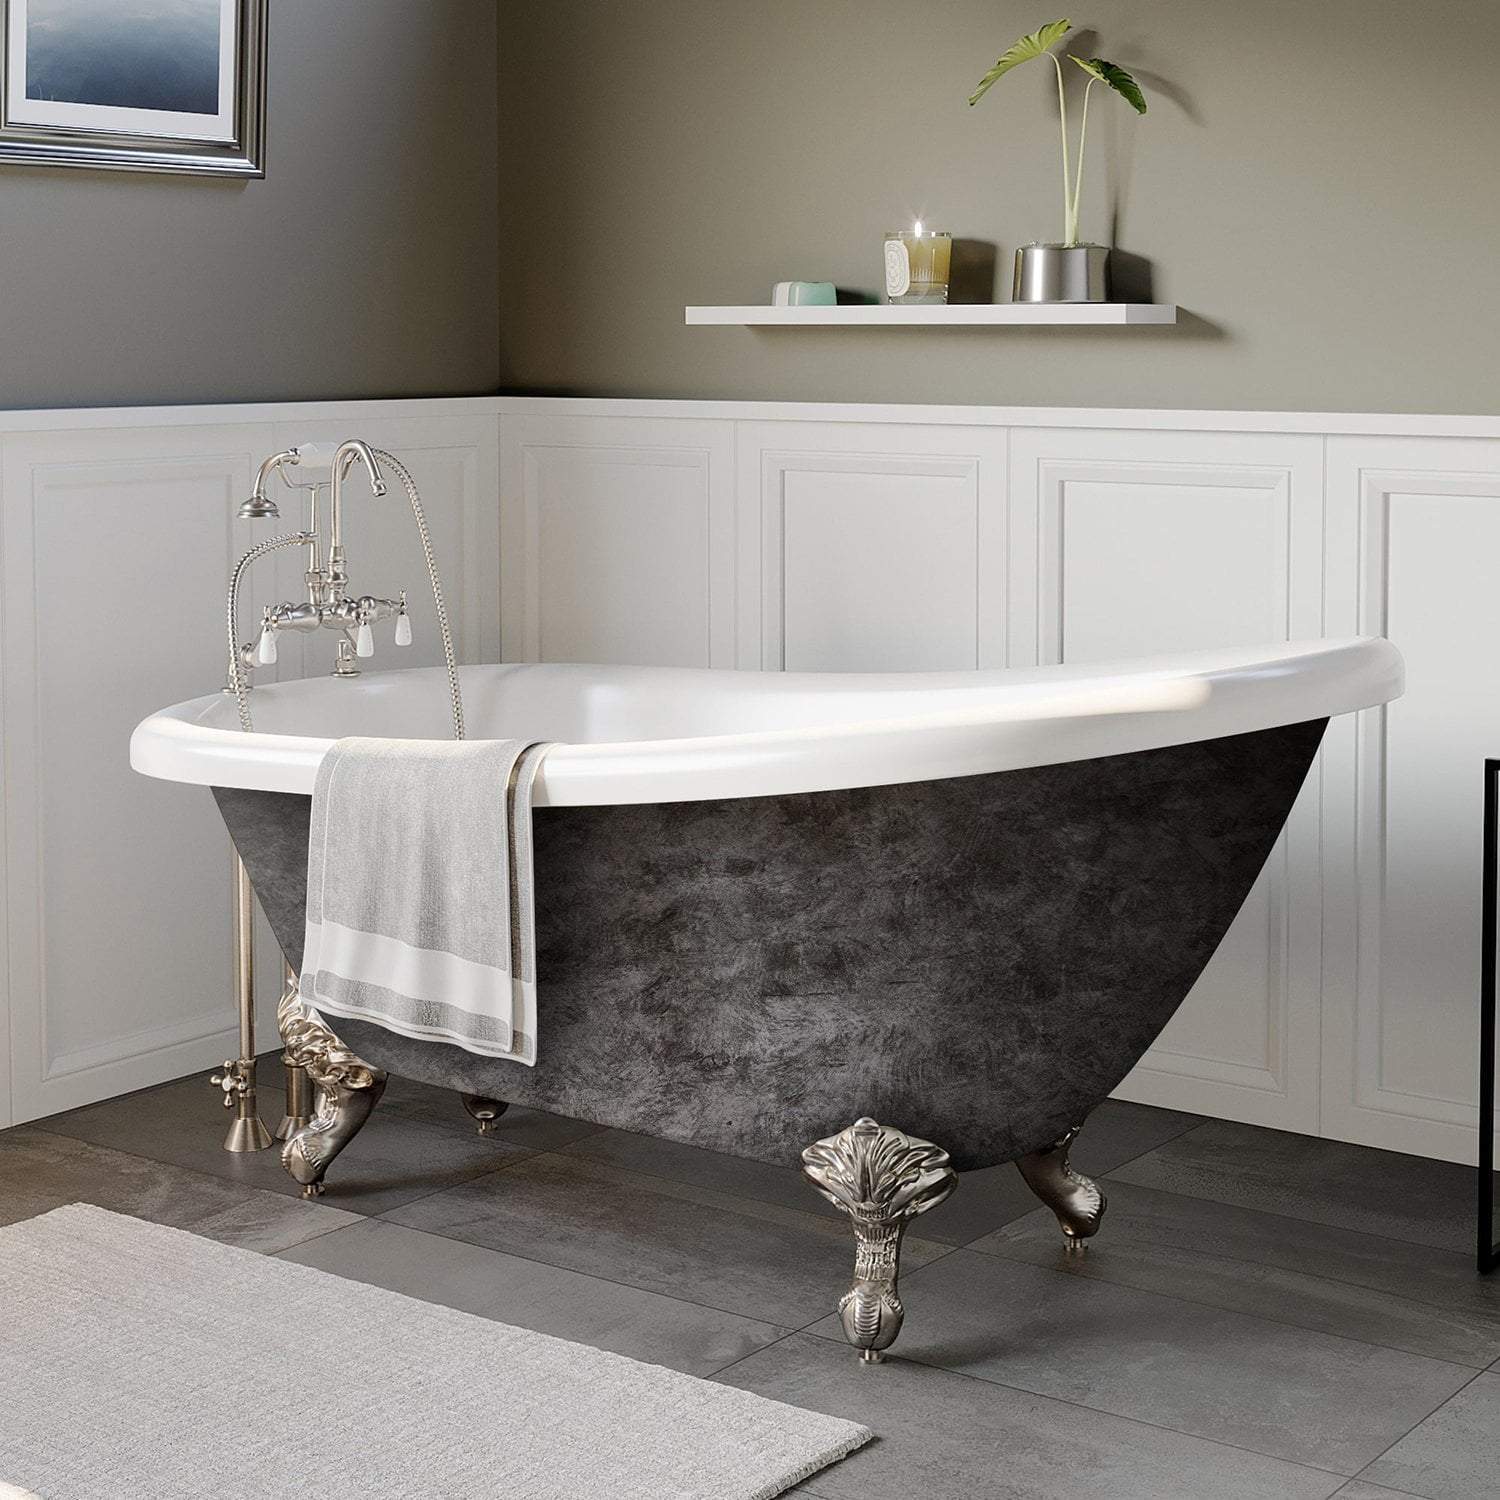 Scorched Platinum 67” x 28” Acrylic Slipper Bathtub with” 7” Deck Mount Faucet Holes and Brushed Nickel Ball and Claw Feet